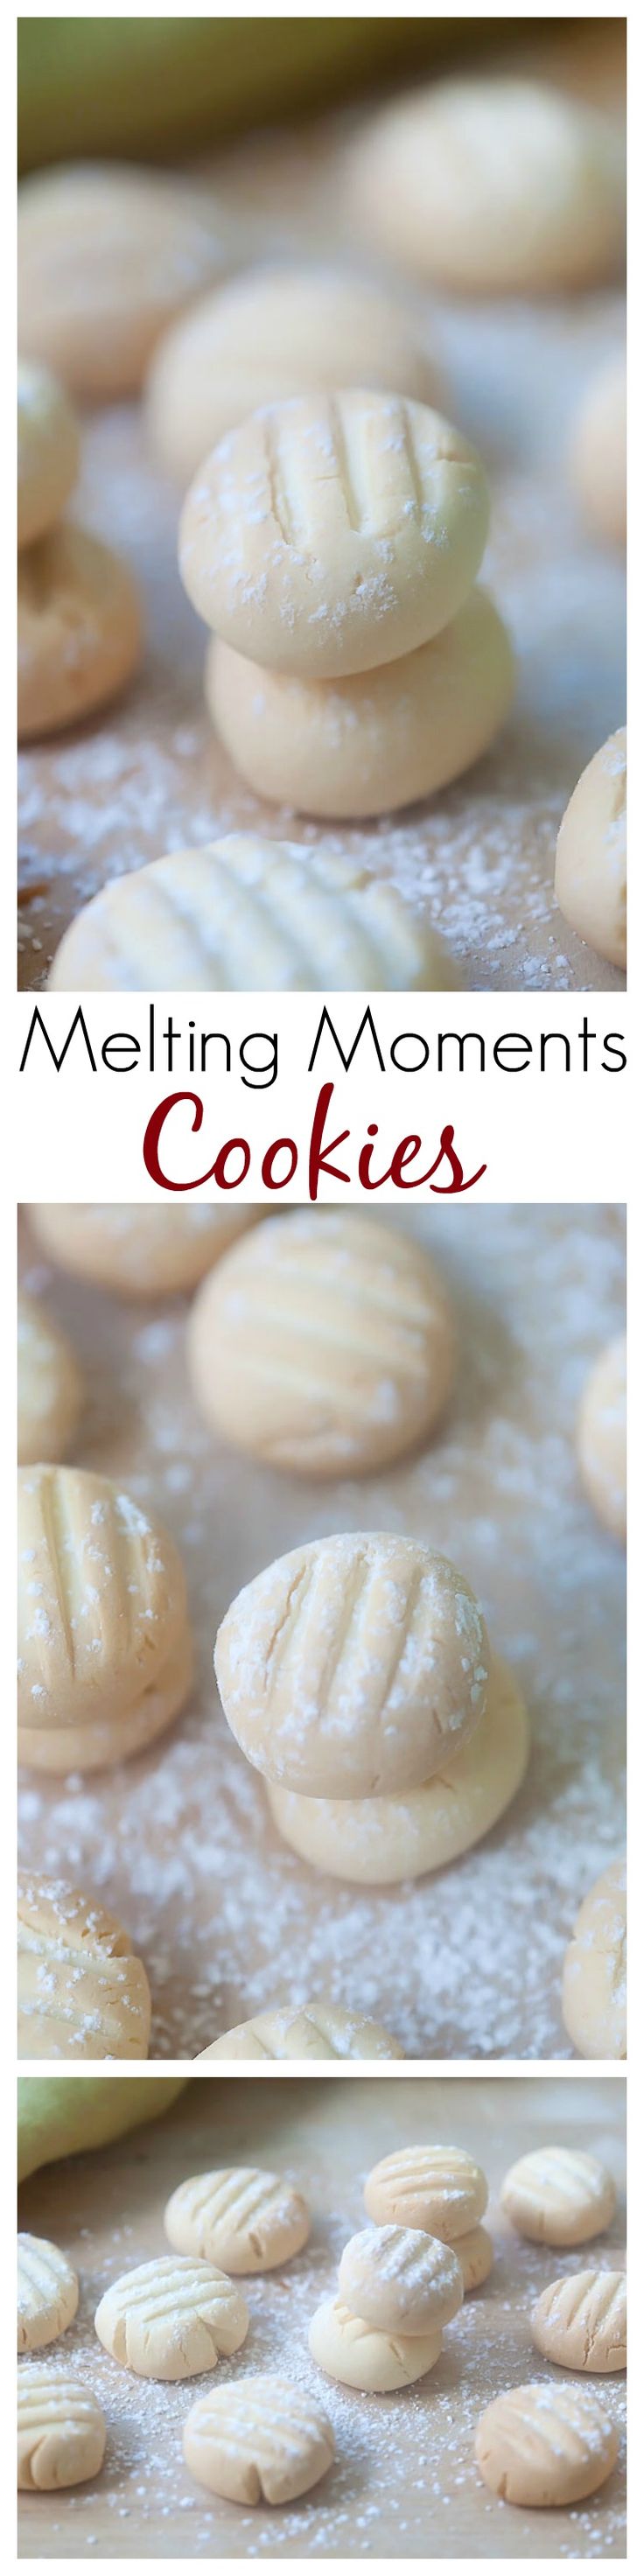 Melting Moments Cookies – the most crumbly, buttery, and delicious cookies ever. So easy to make but yields the best melting moments cookies | rasamalaysia.com